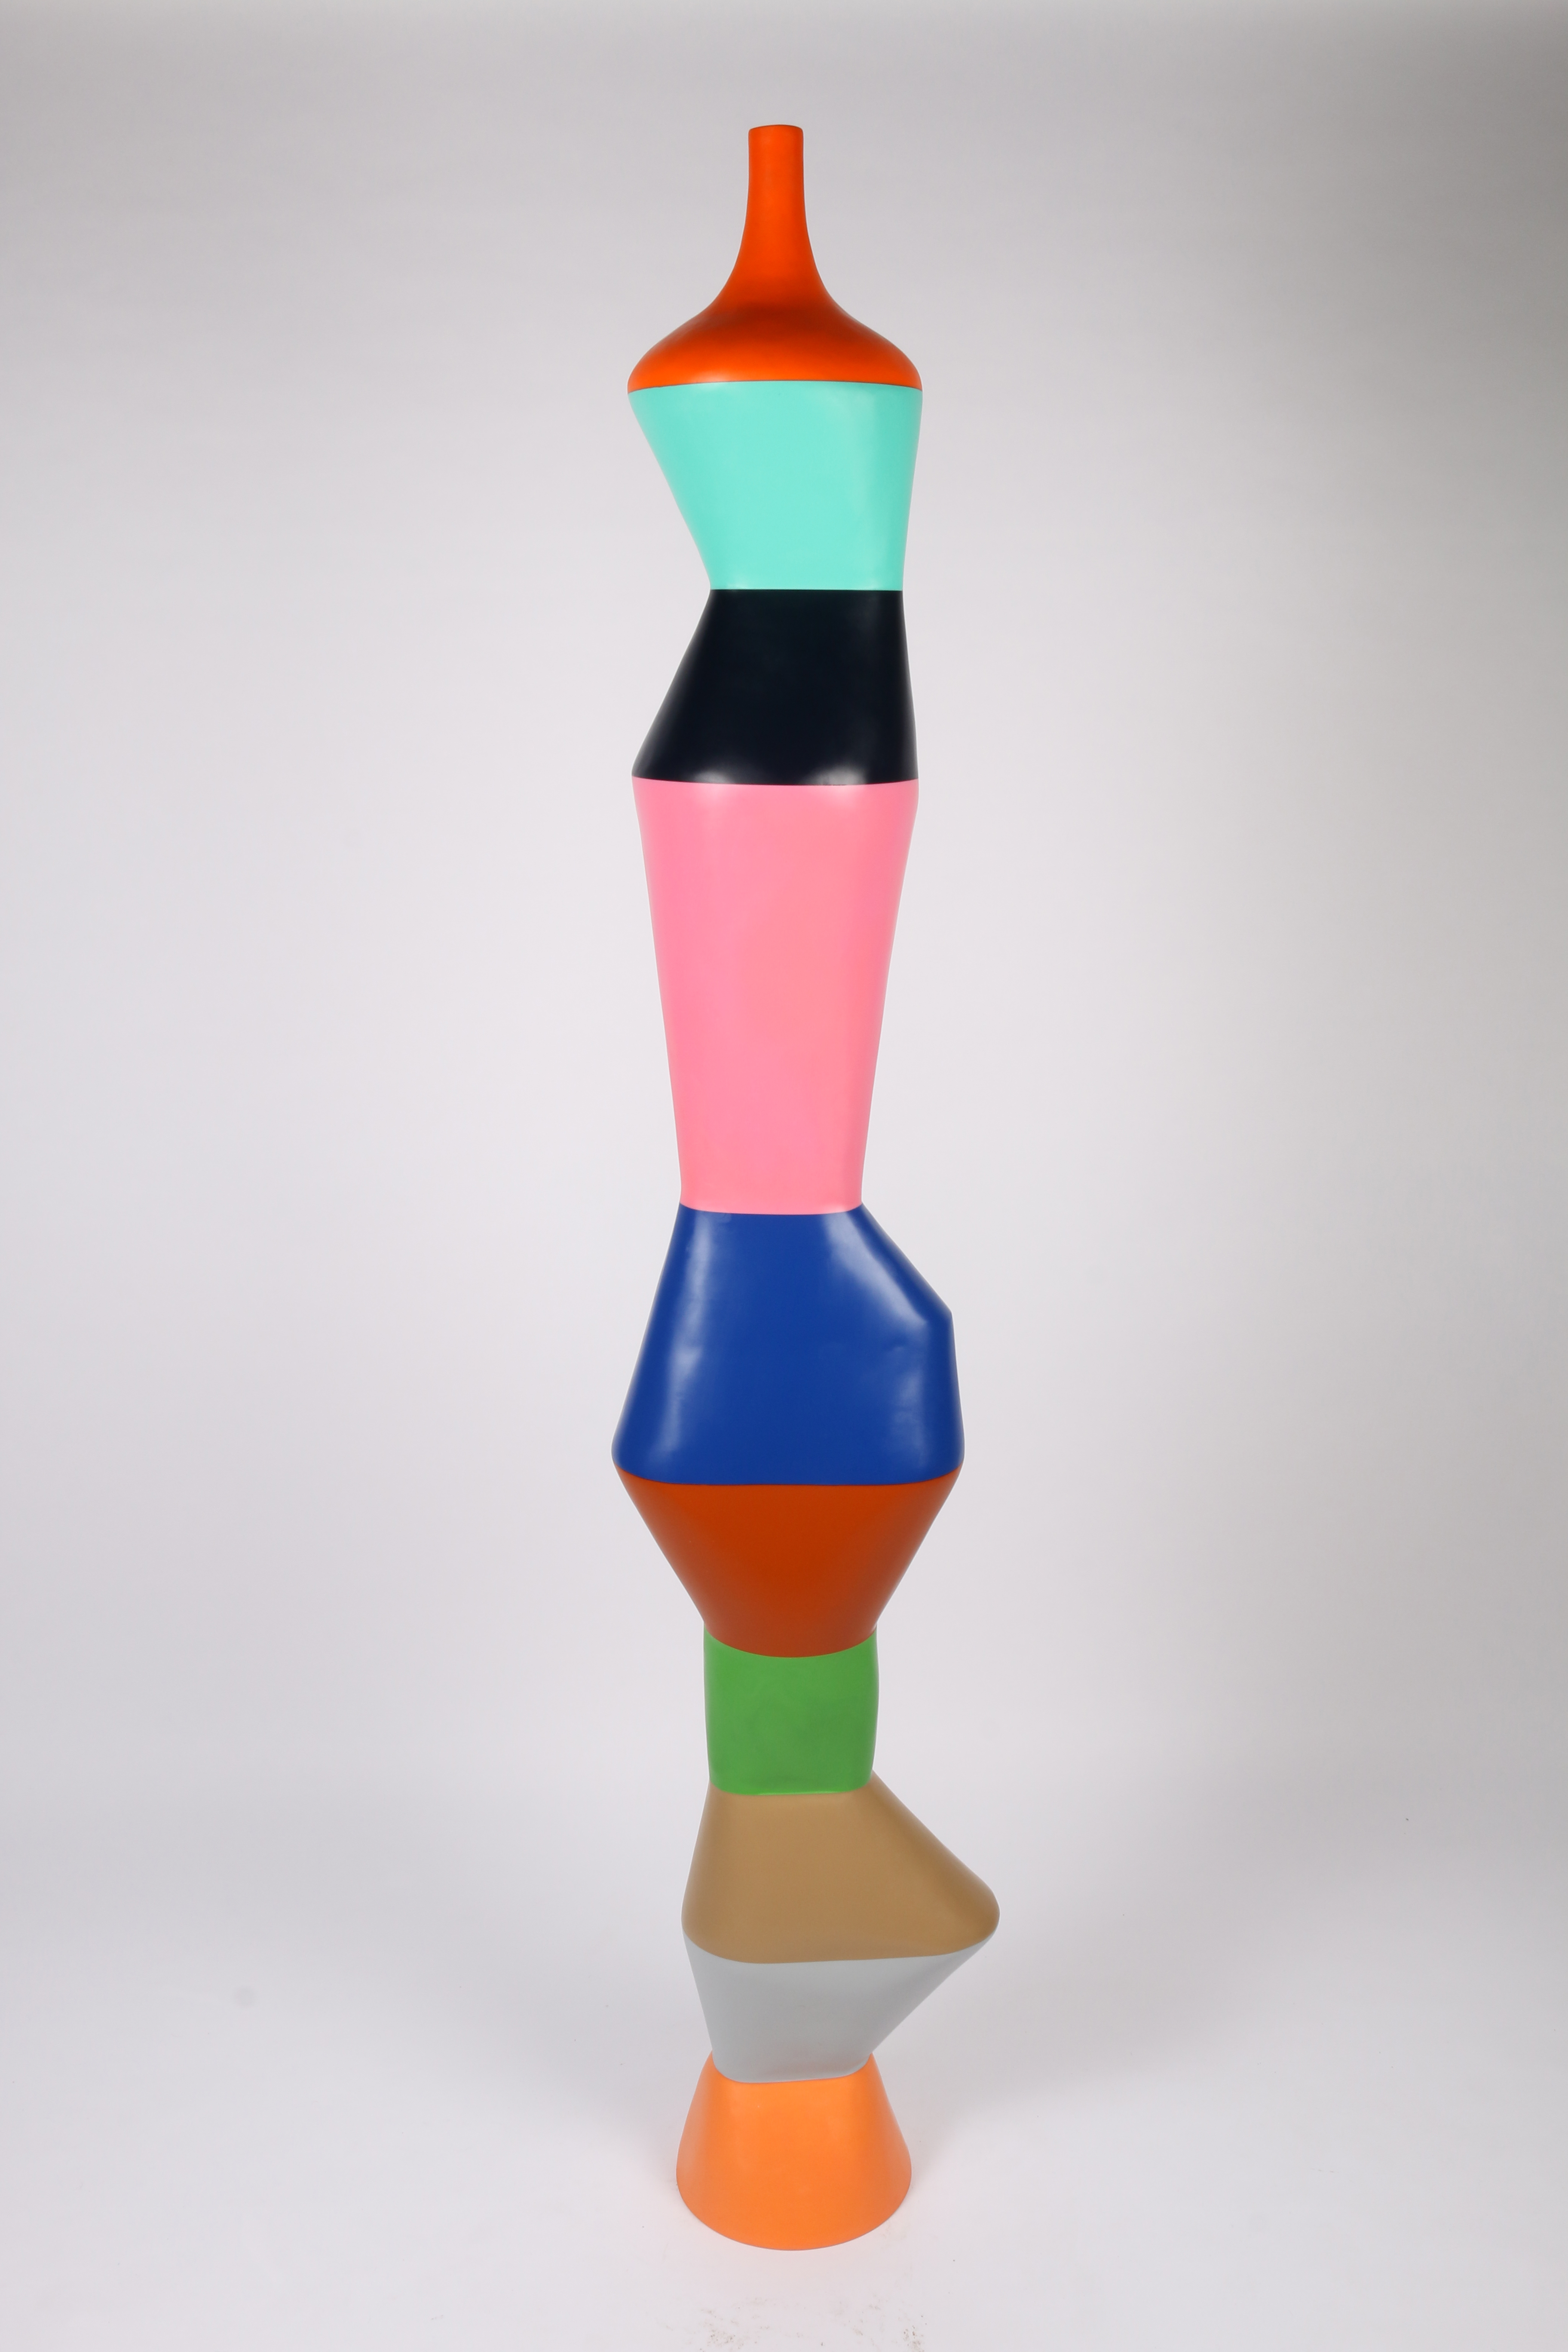 Totem 14 by Stephen Ormandy at Olsen Gallery